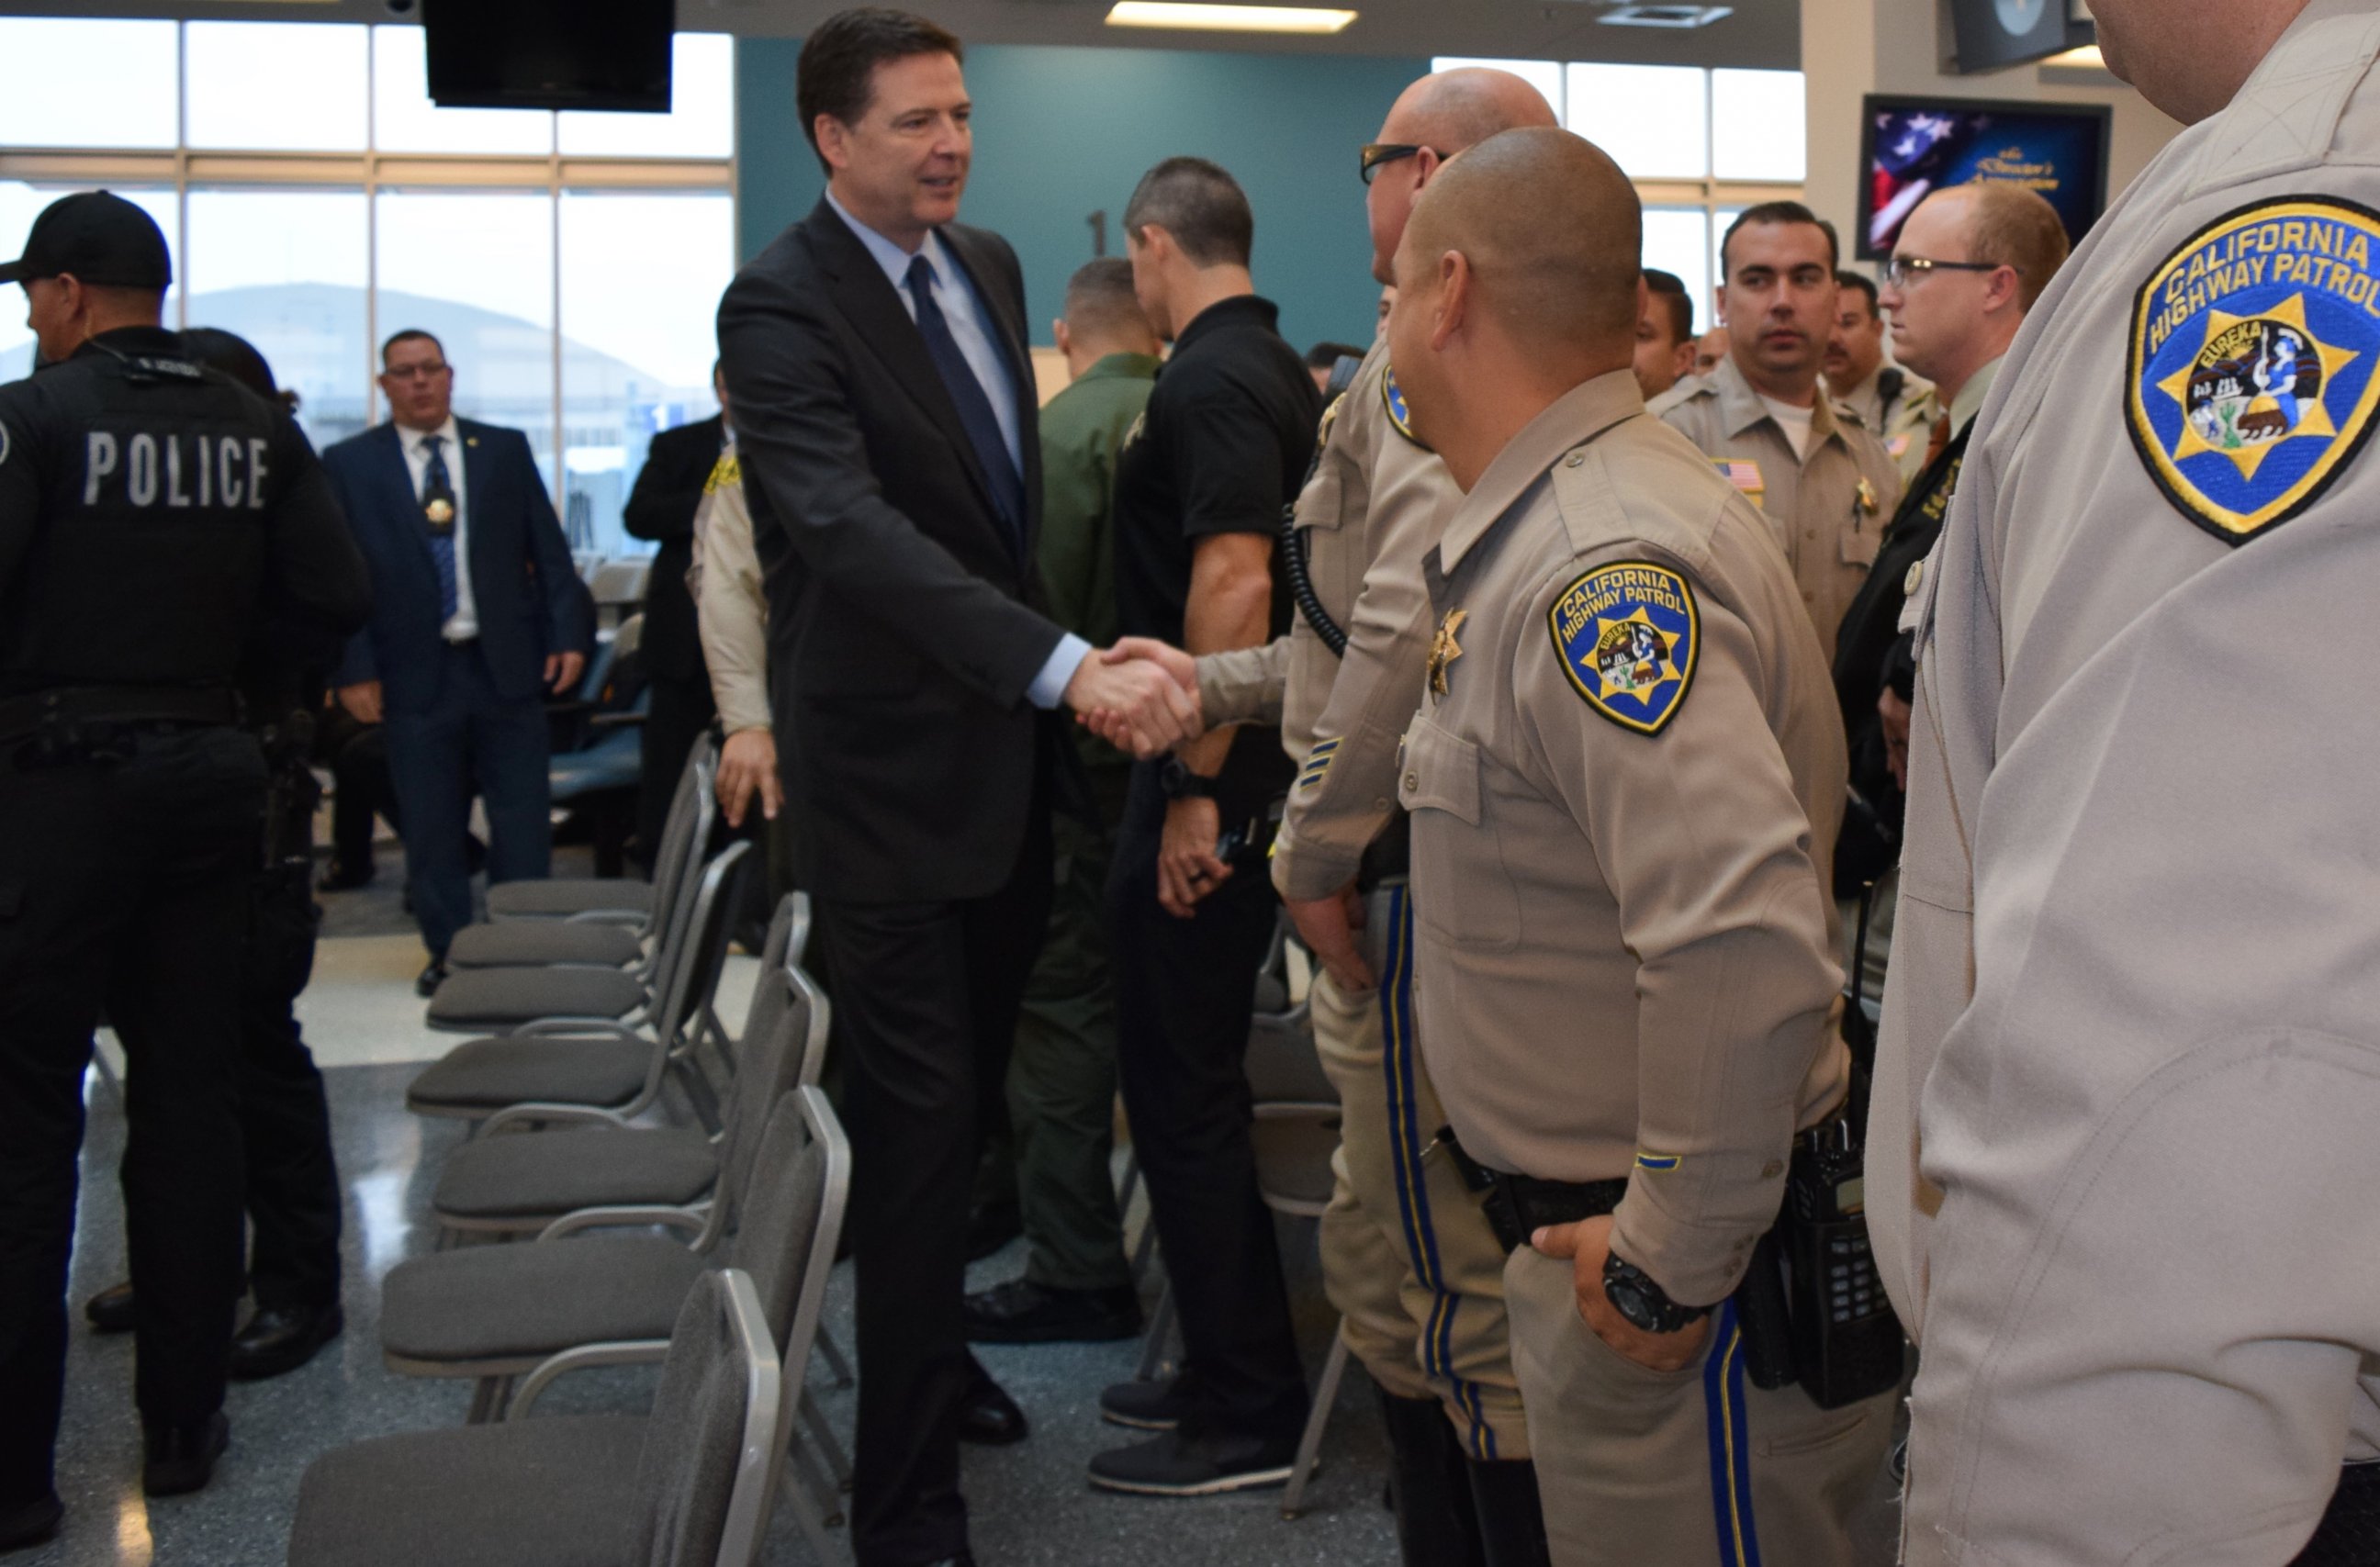 PHOTO: FBI Director James Comey and David Bowdich, Assistant Director in Charge of the FBI's Los Angeles Field Office, met with law enforcement who responded to the San Bernardino attack, Dec. 22, 2015.